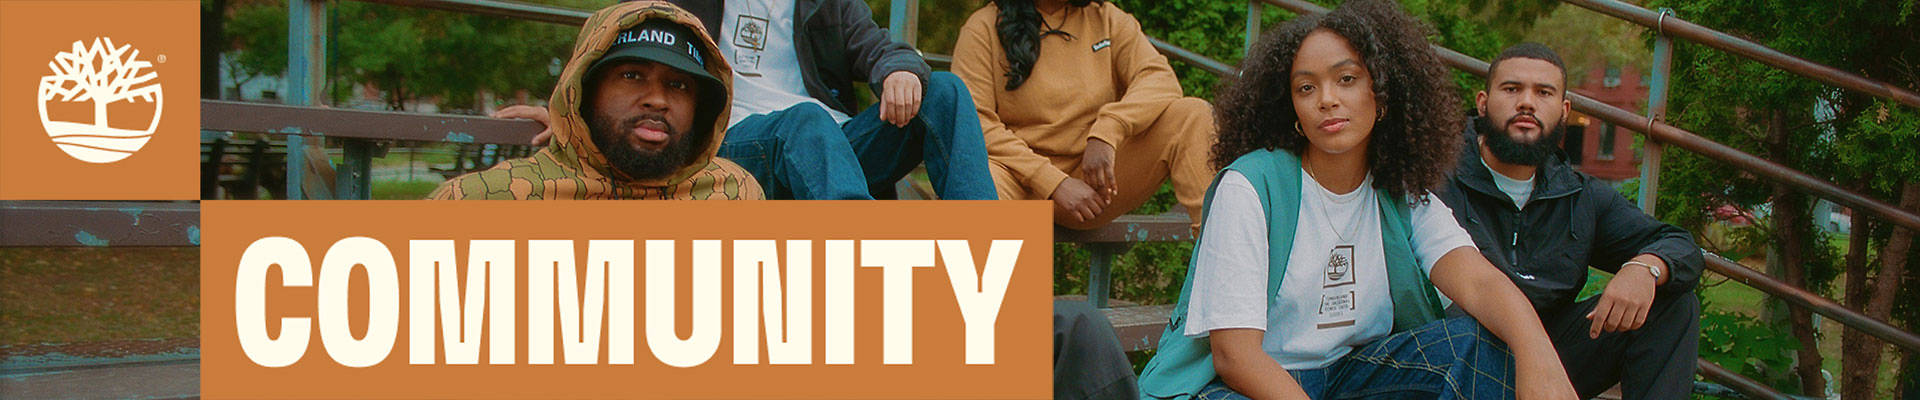 Image of five young friends, two women and three men, all different races, wearing Timberland clothing and footwear, sitting together on blue-and-rust colored bleachers outside against a backdrop of trees.